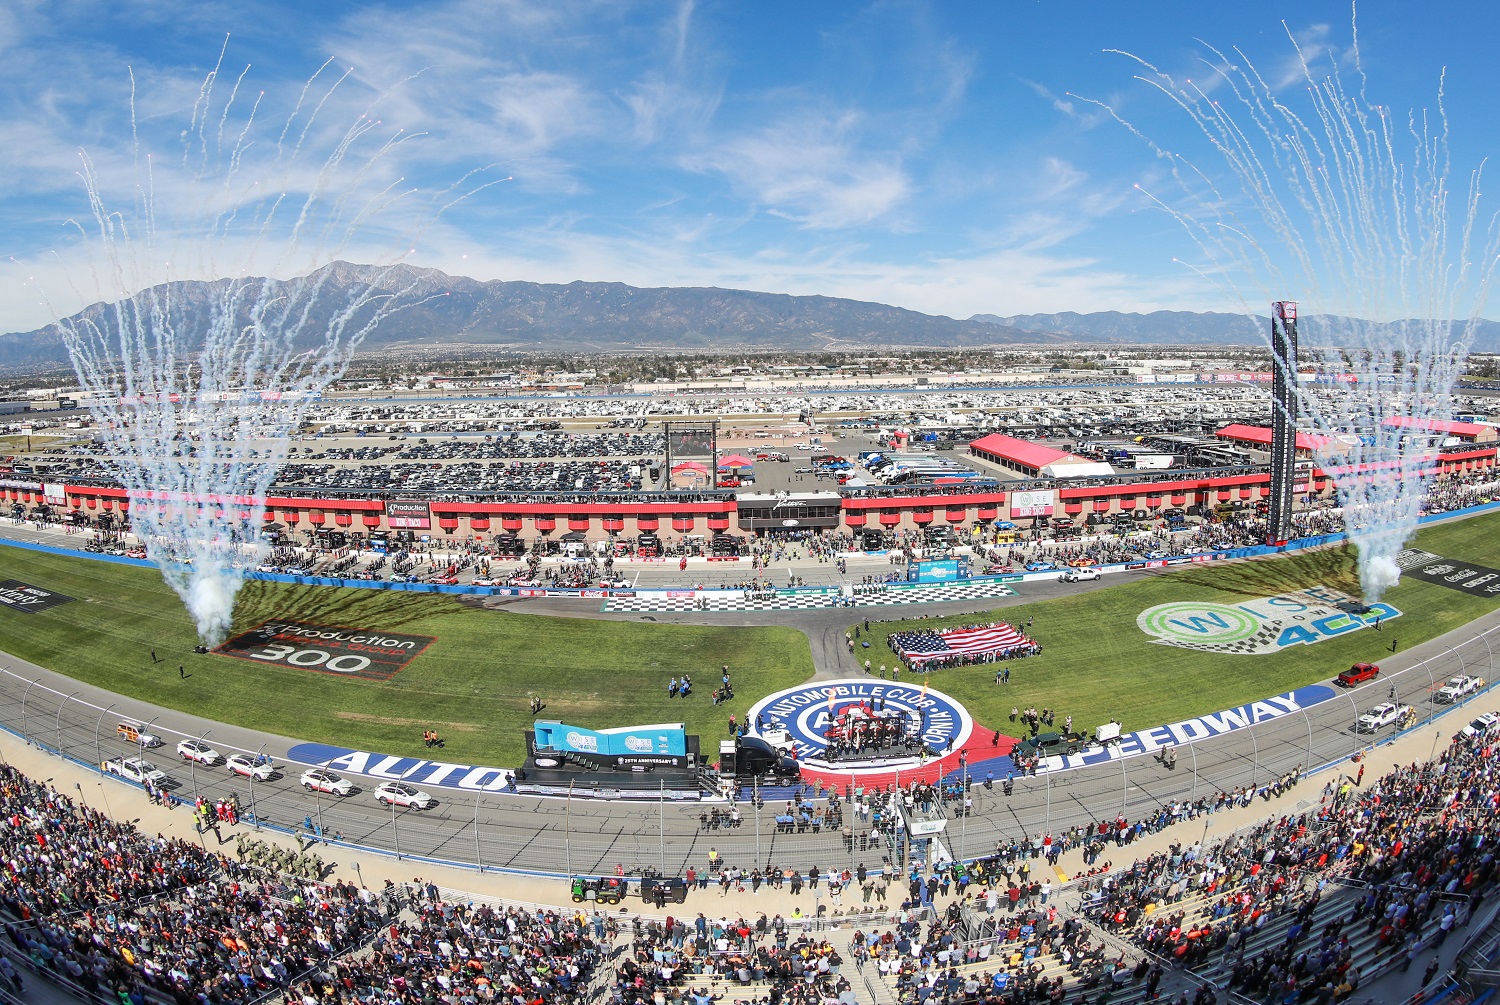 Pre-race ceremonies during the NASCAR Cup Series Wise Power 400 on Feb. 27, 2022, at Auto Club Speedway in Fontana, California. | Will Navarro/Icon Sportswire via Getty Images